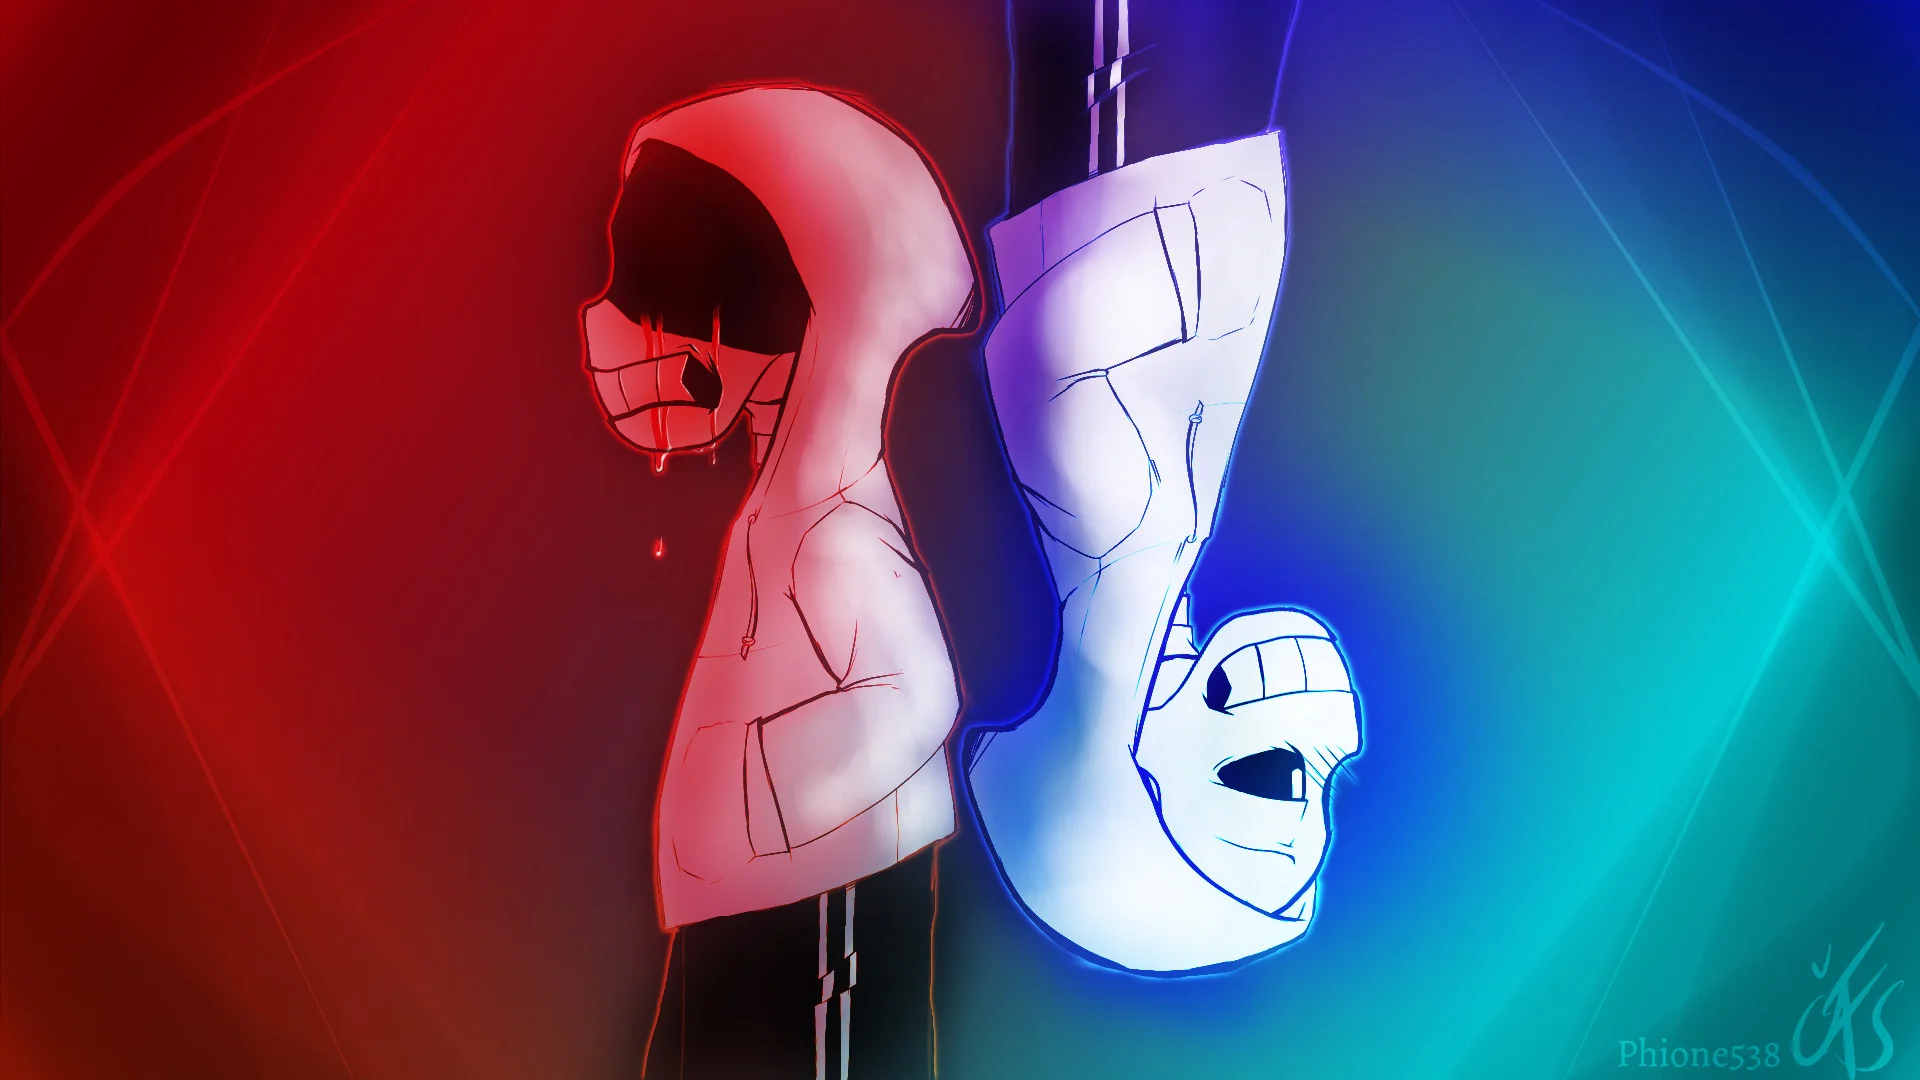 Undertale – Both Sides of Sans HD Wallpaper by Phione538